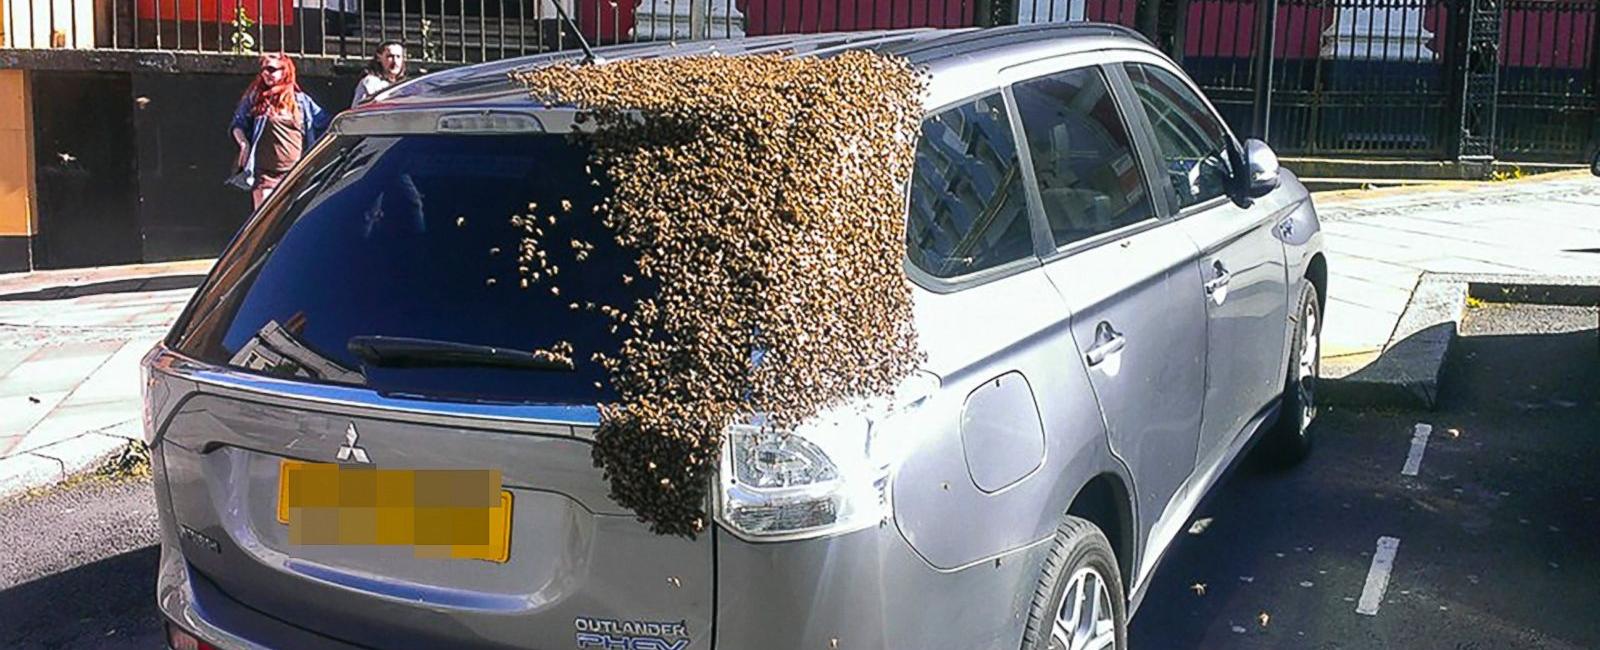 A swarm of 20 000 bees followed a car for two days because their queen was stuck inside